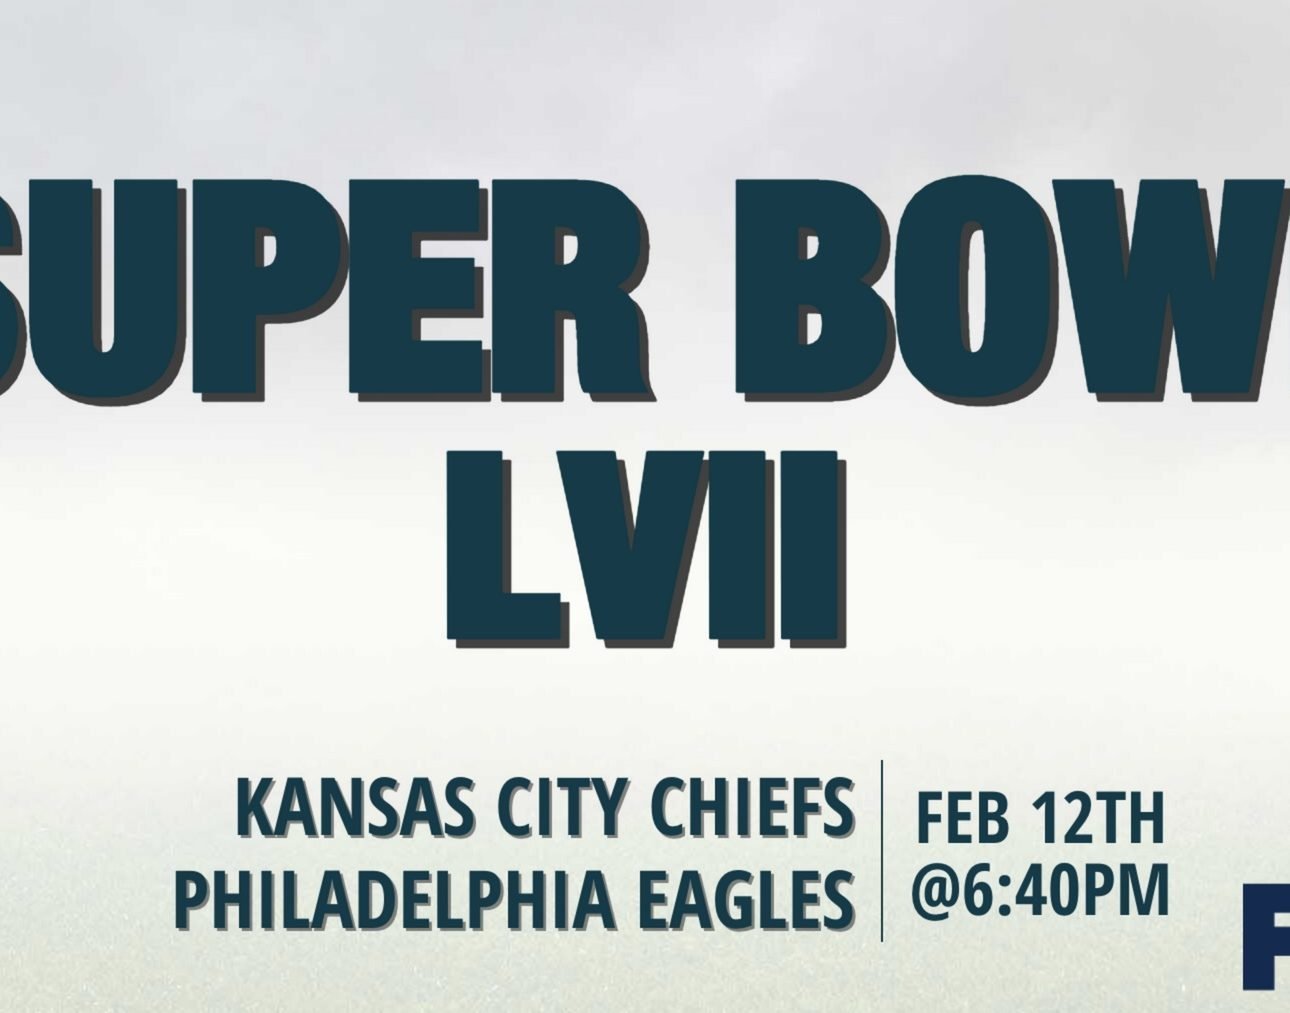 Inactive players: Chiefs vs Eagles; How to watch Super Bowl LVII